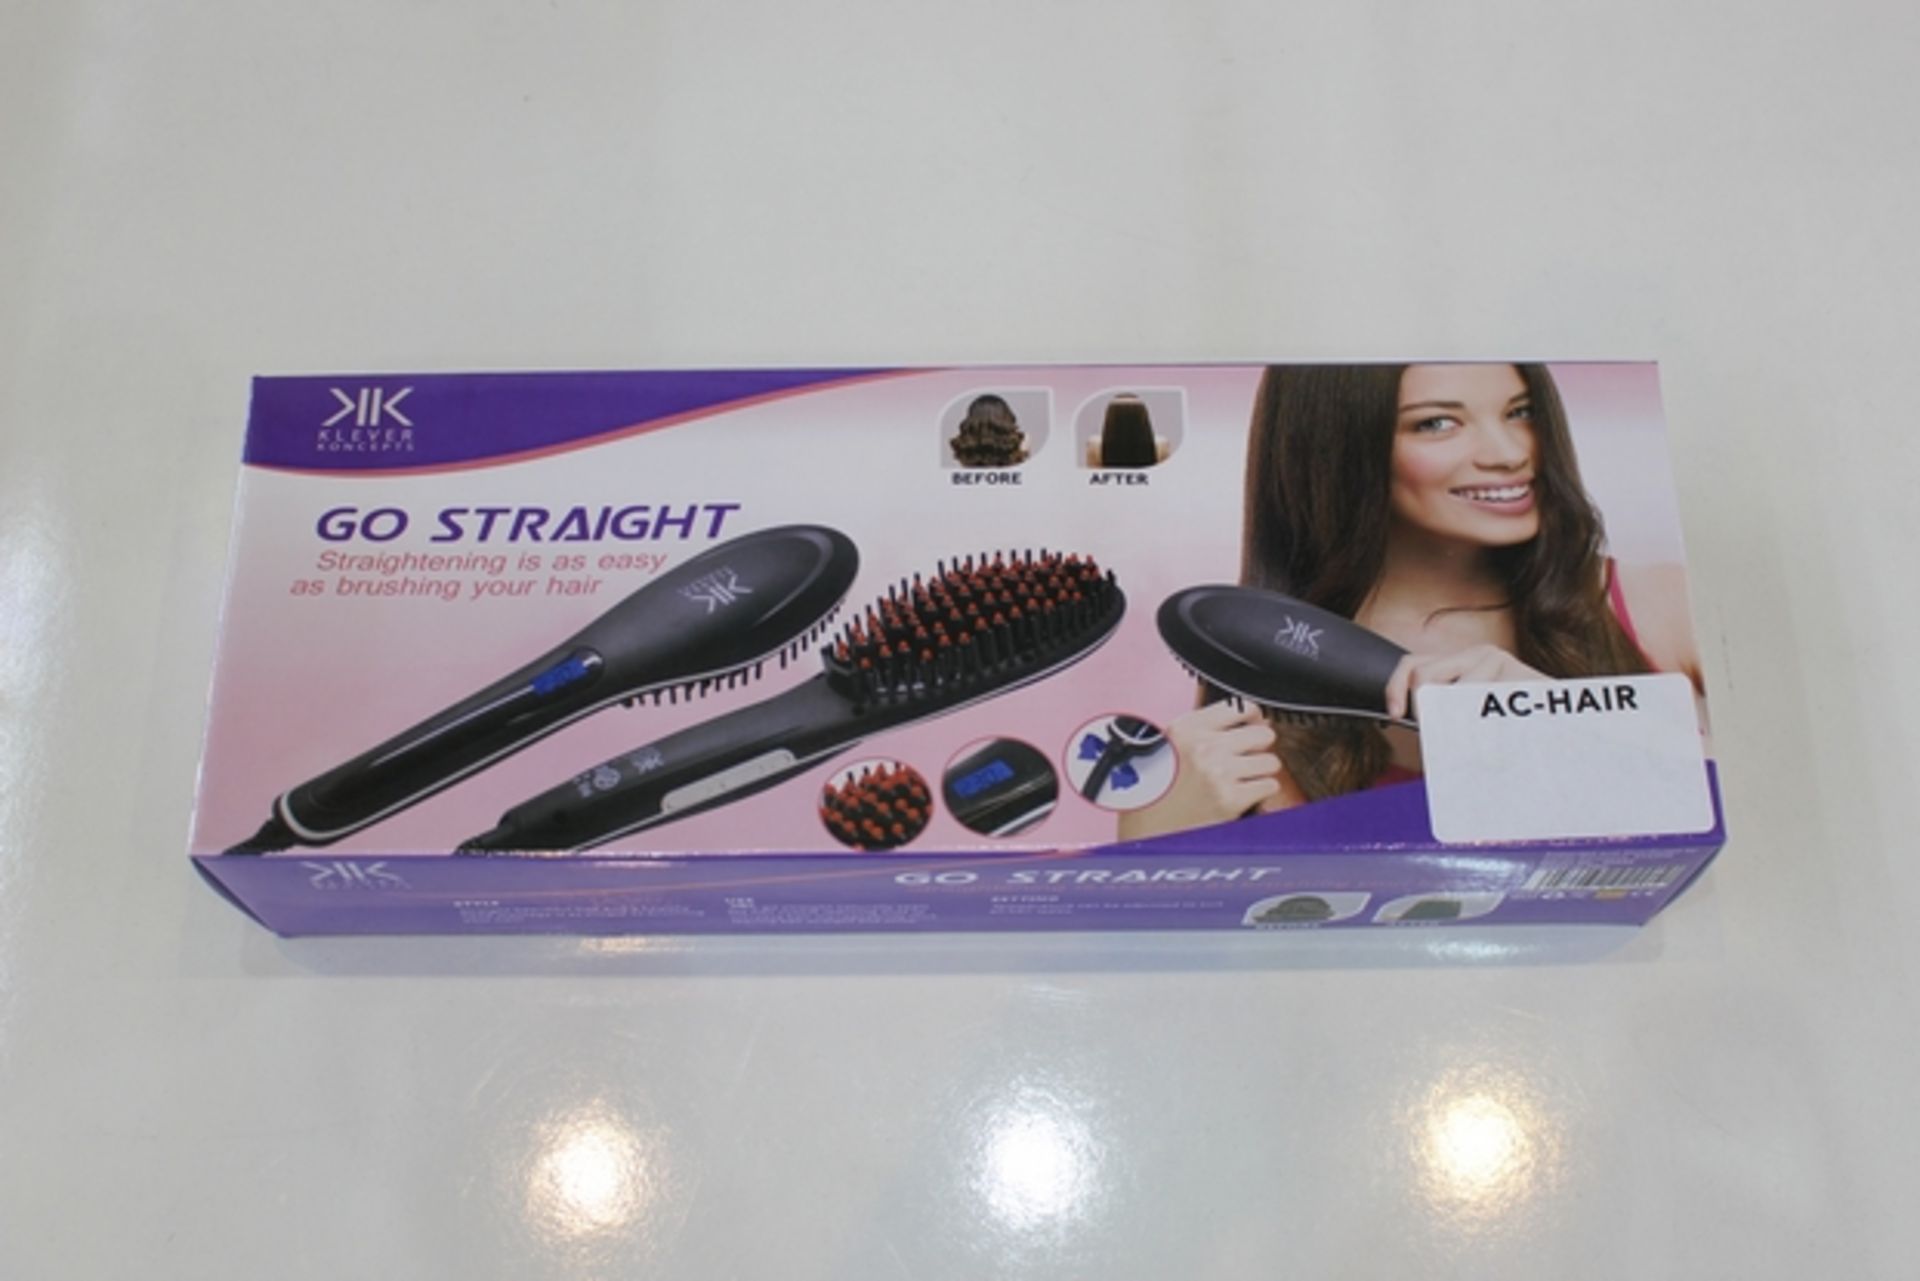 1X LOT TO CONTAIN 2X BOXED BRAND NEW GO STRAIGHT HAIR BRUSHES 'STRAIGHTENING IS AS EASY AS